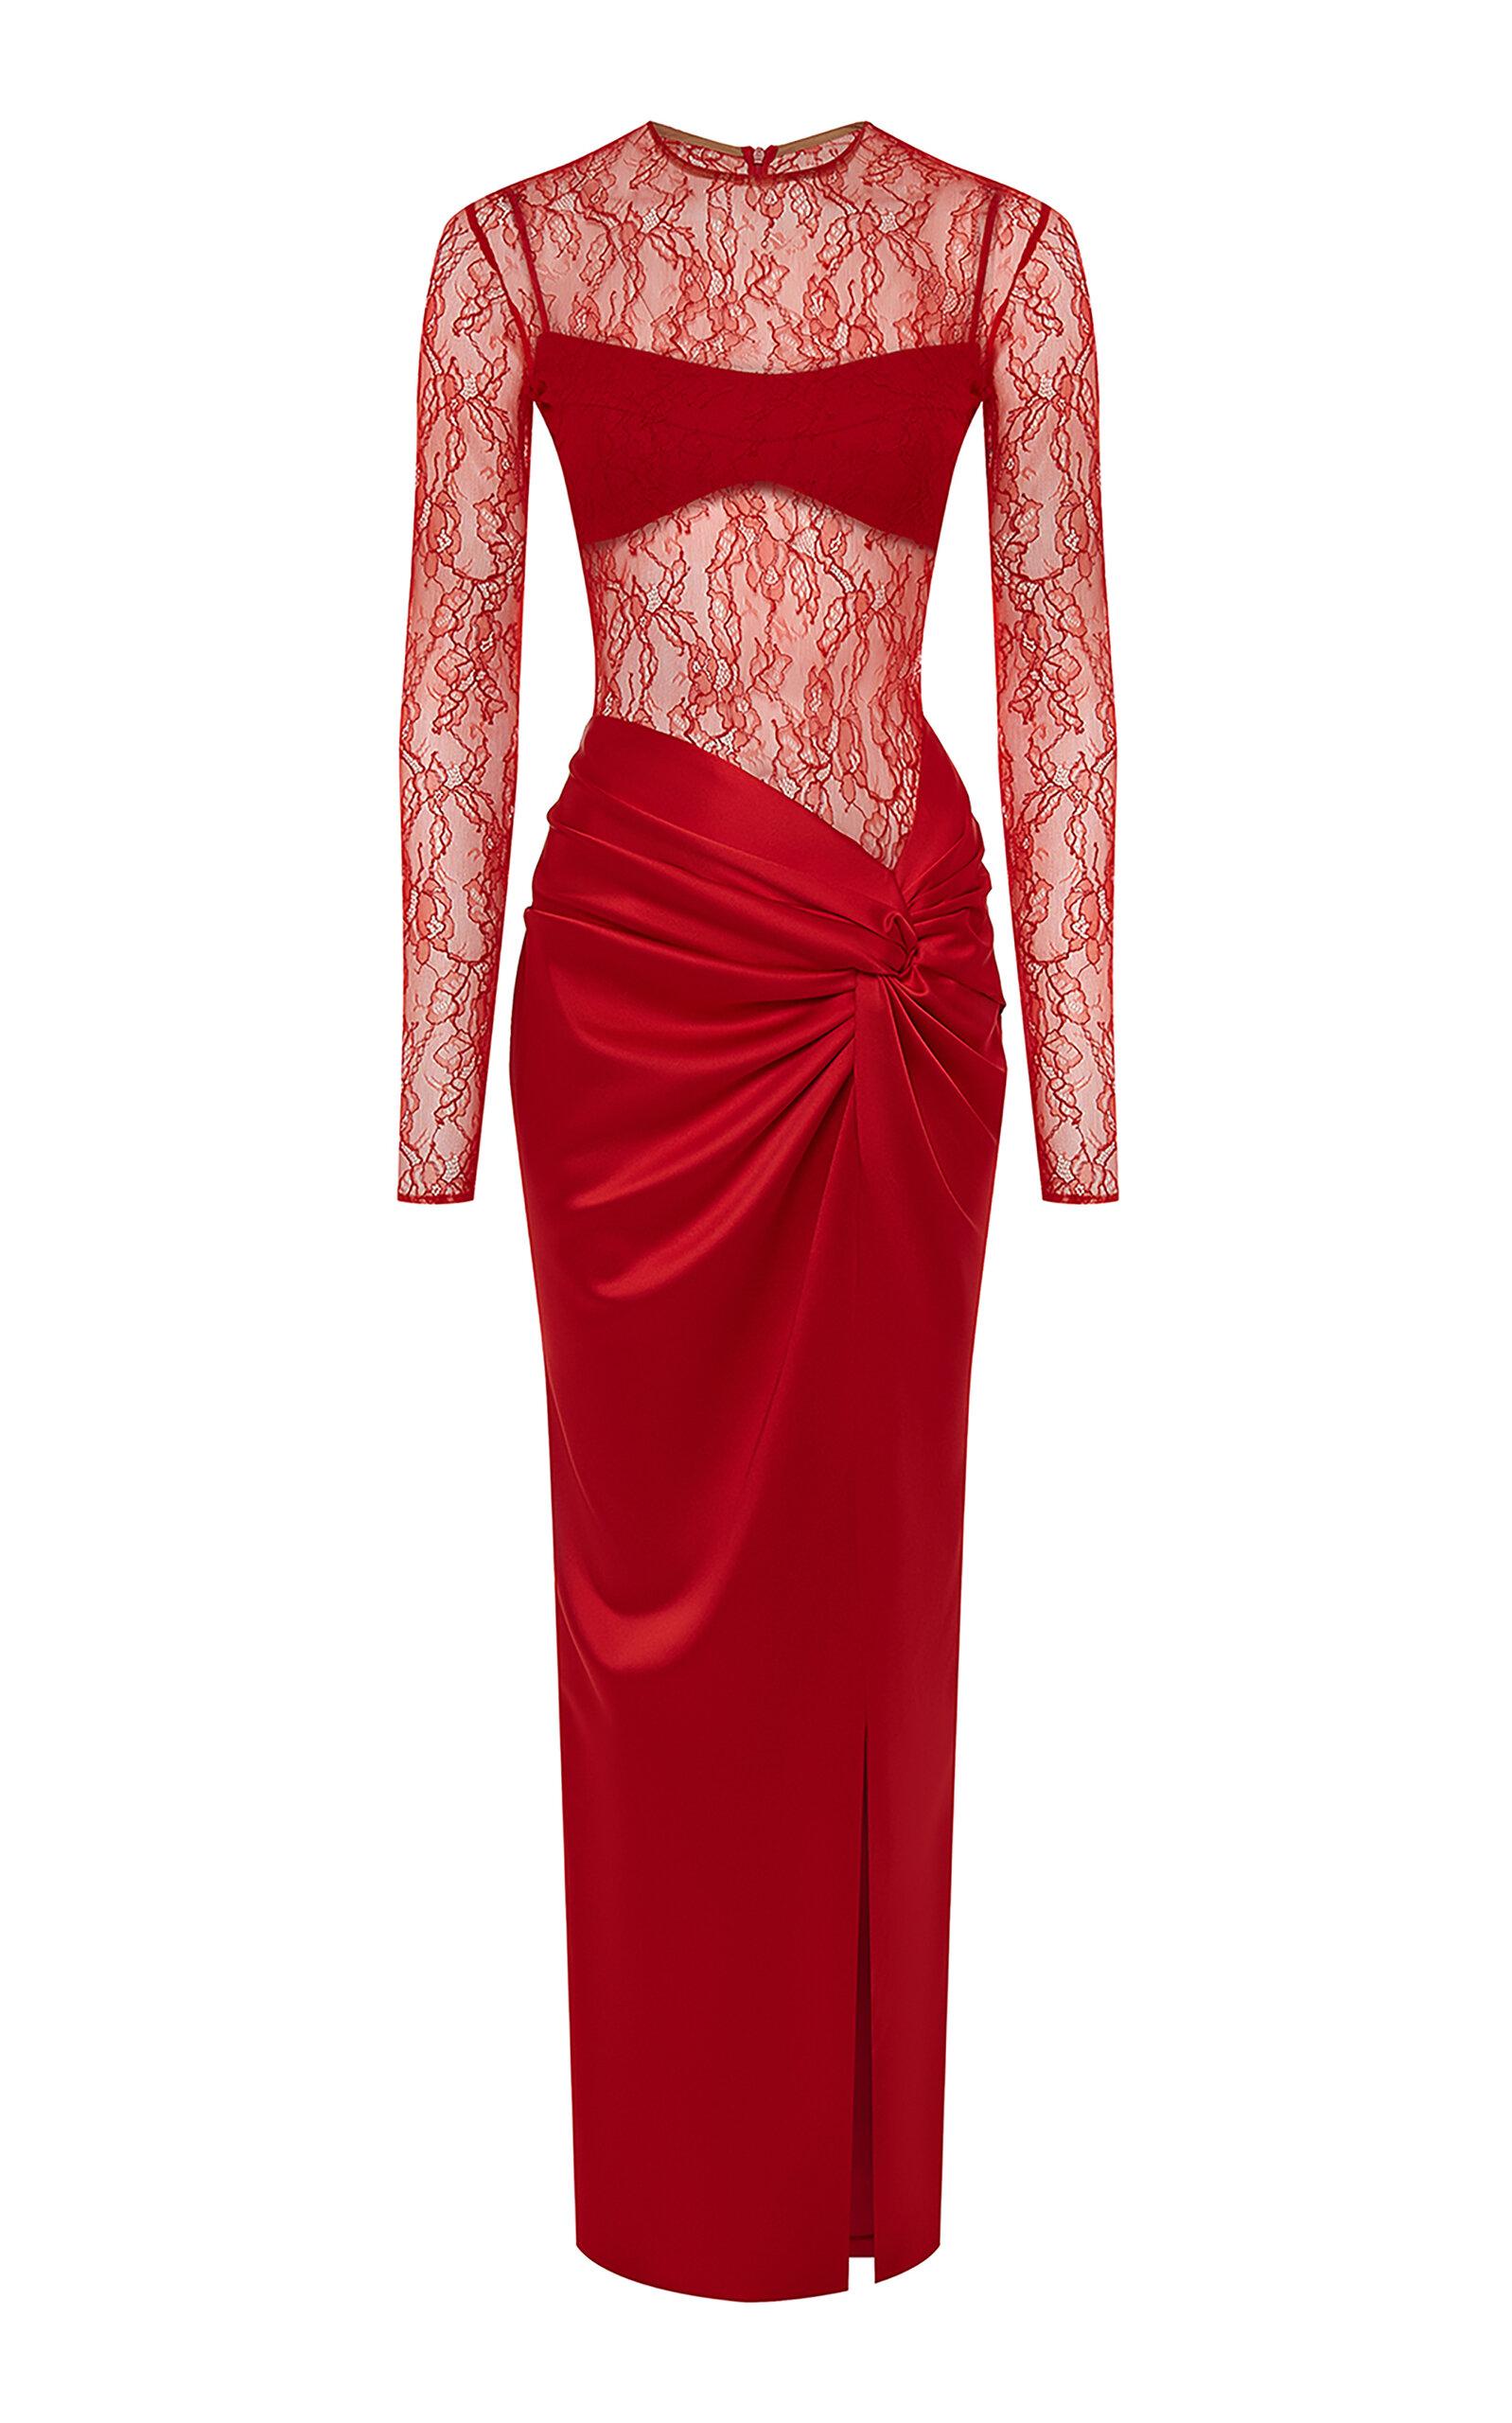 Rasario Draped Lace & Satin Maxi Dress in Red | Lyst